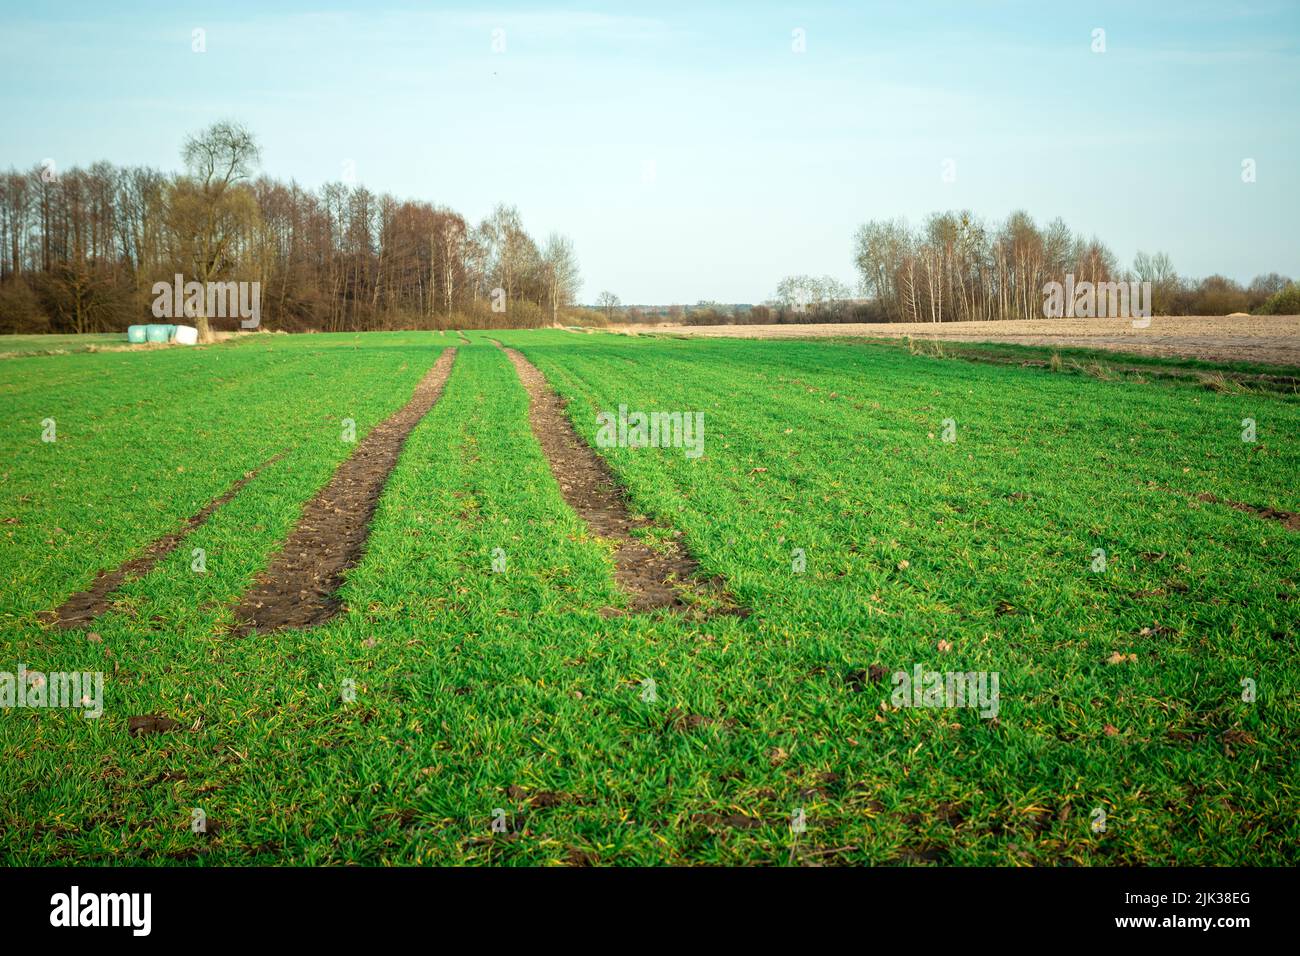 Technological path in the field of young plants Stock Photo